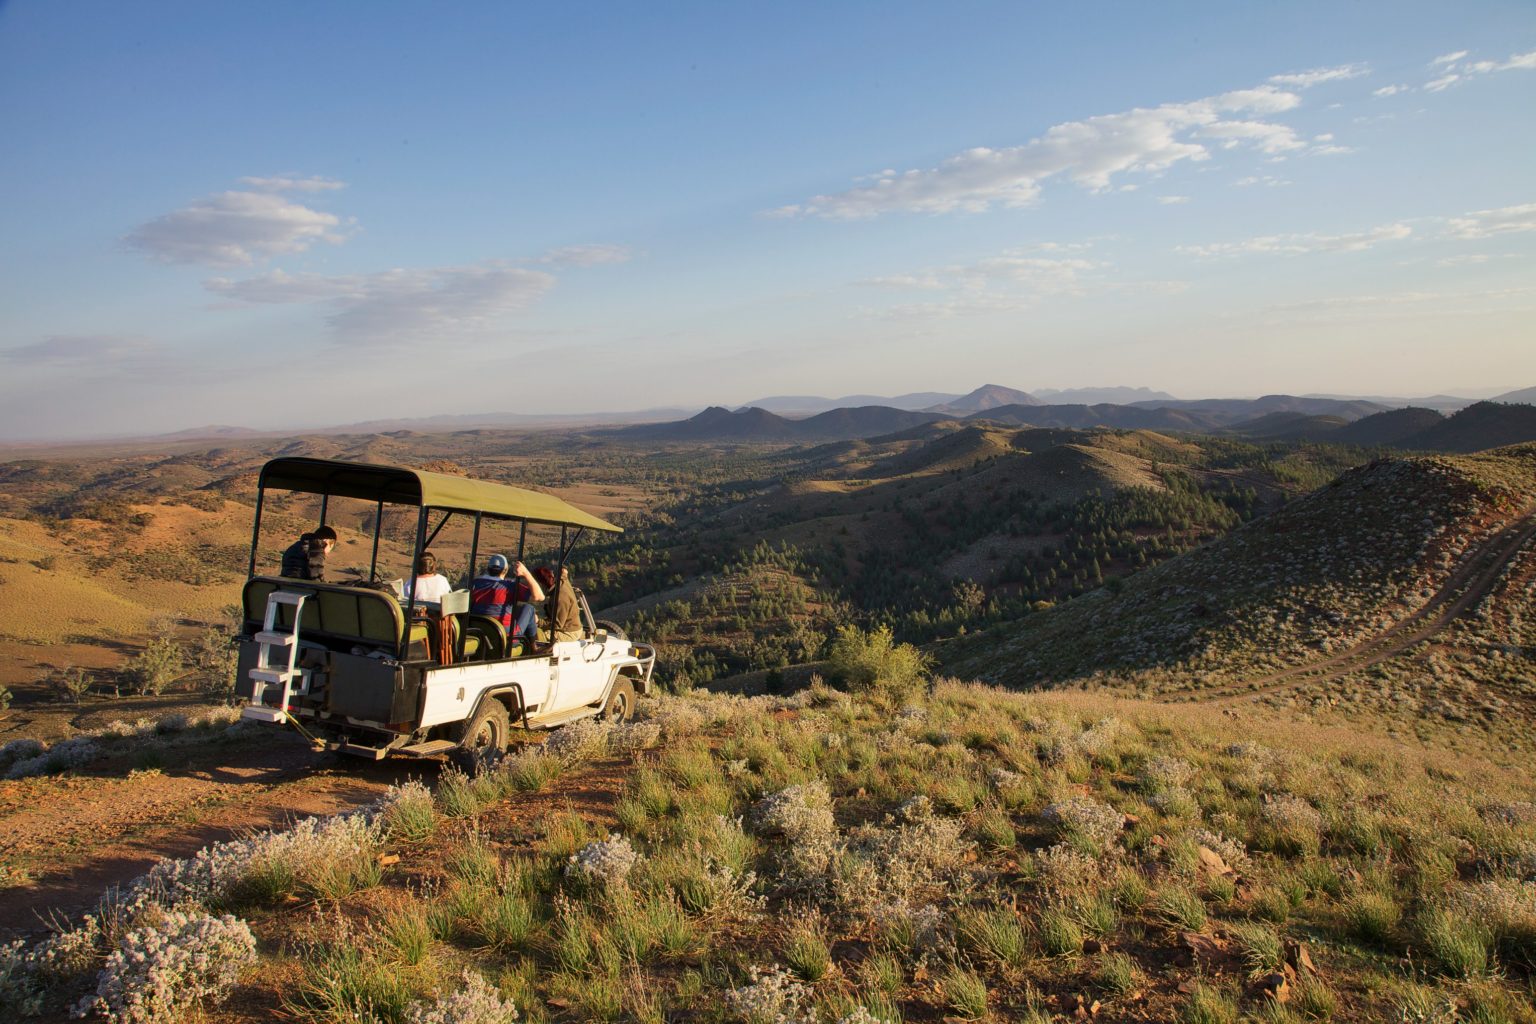 A safari vehicle driving on a dirt road through the hills of the Flinders Ranges at Arkaba